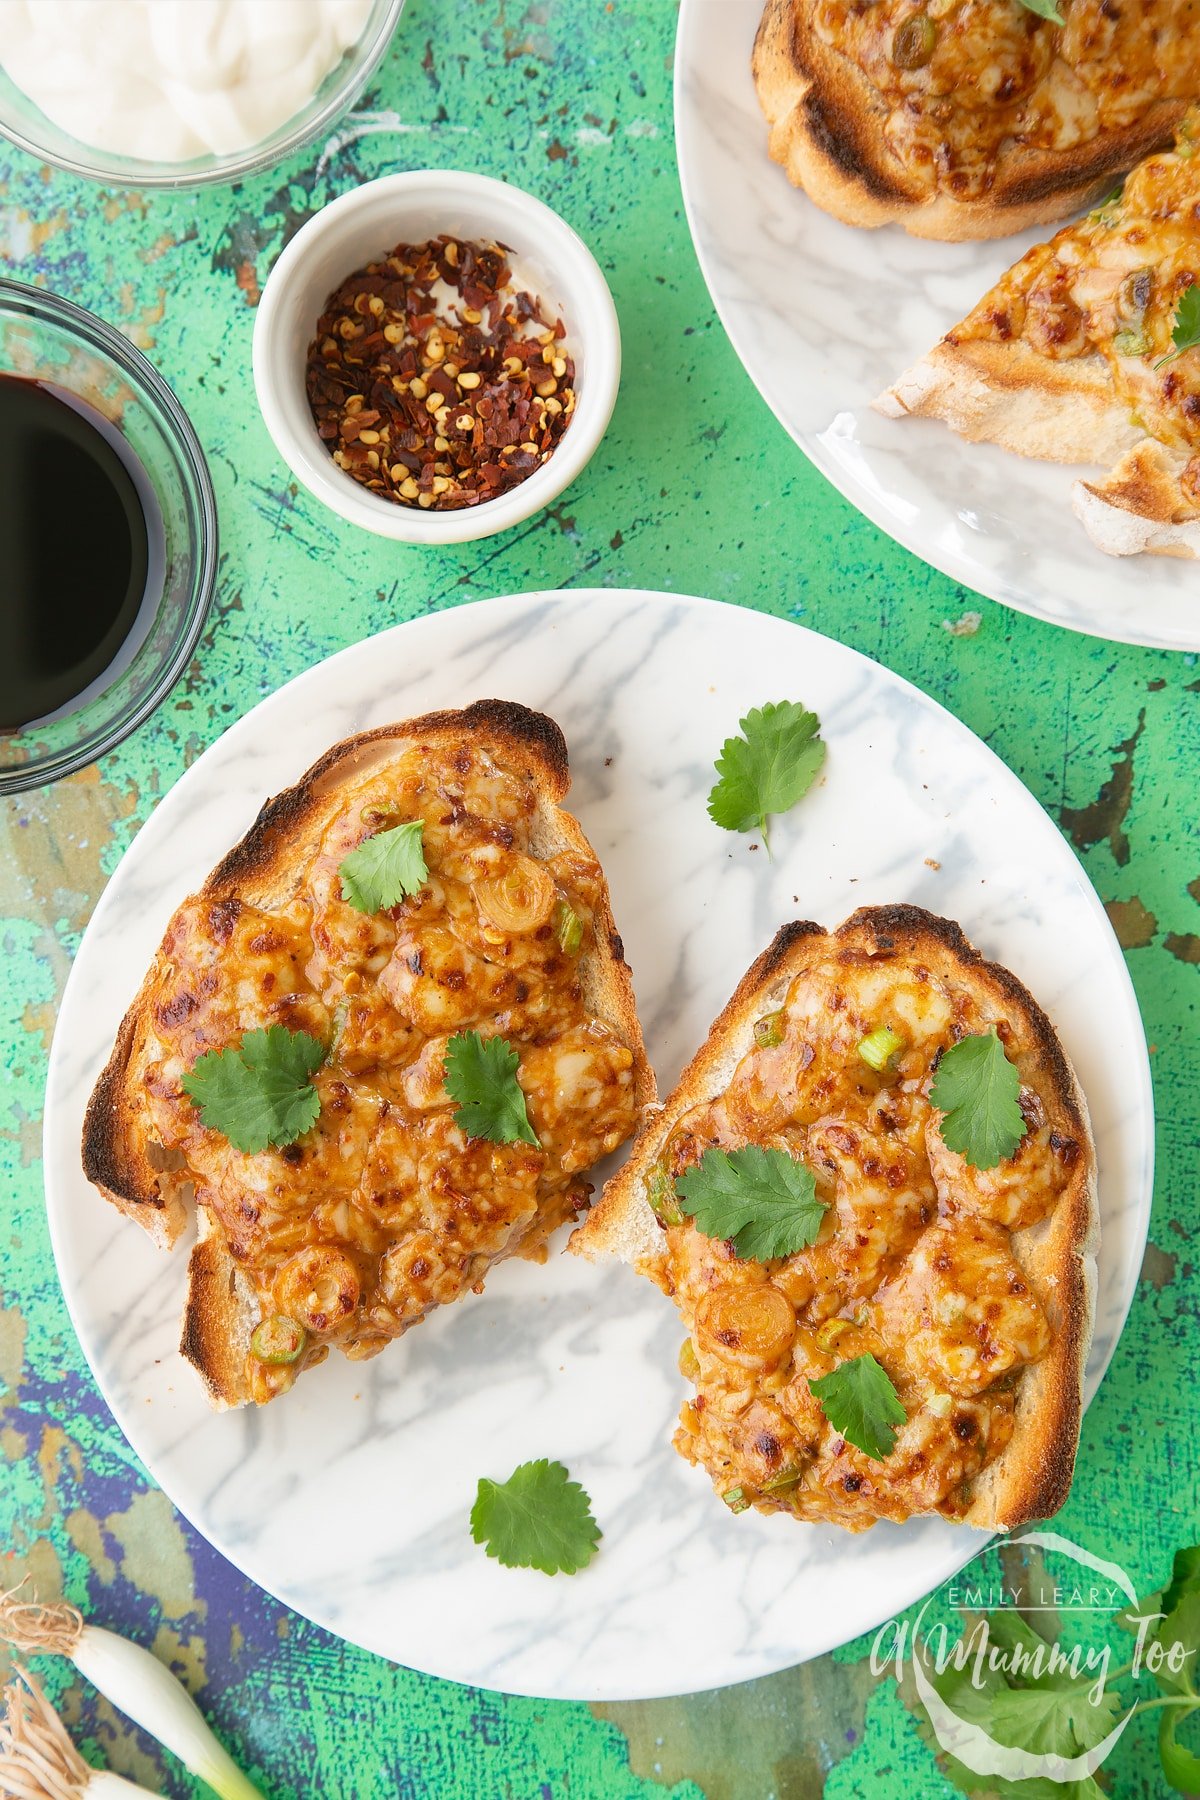 Two pieces of chilli cheese toast  on a white marbled plate, scattered with coriander. One has a bite out of it.